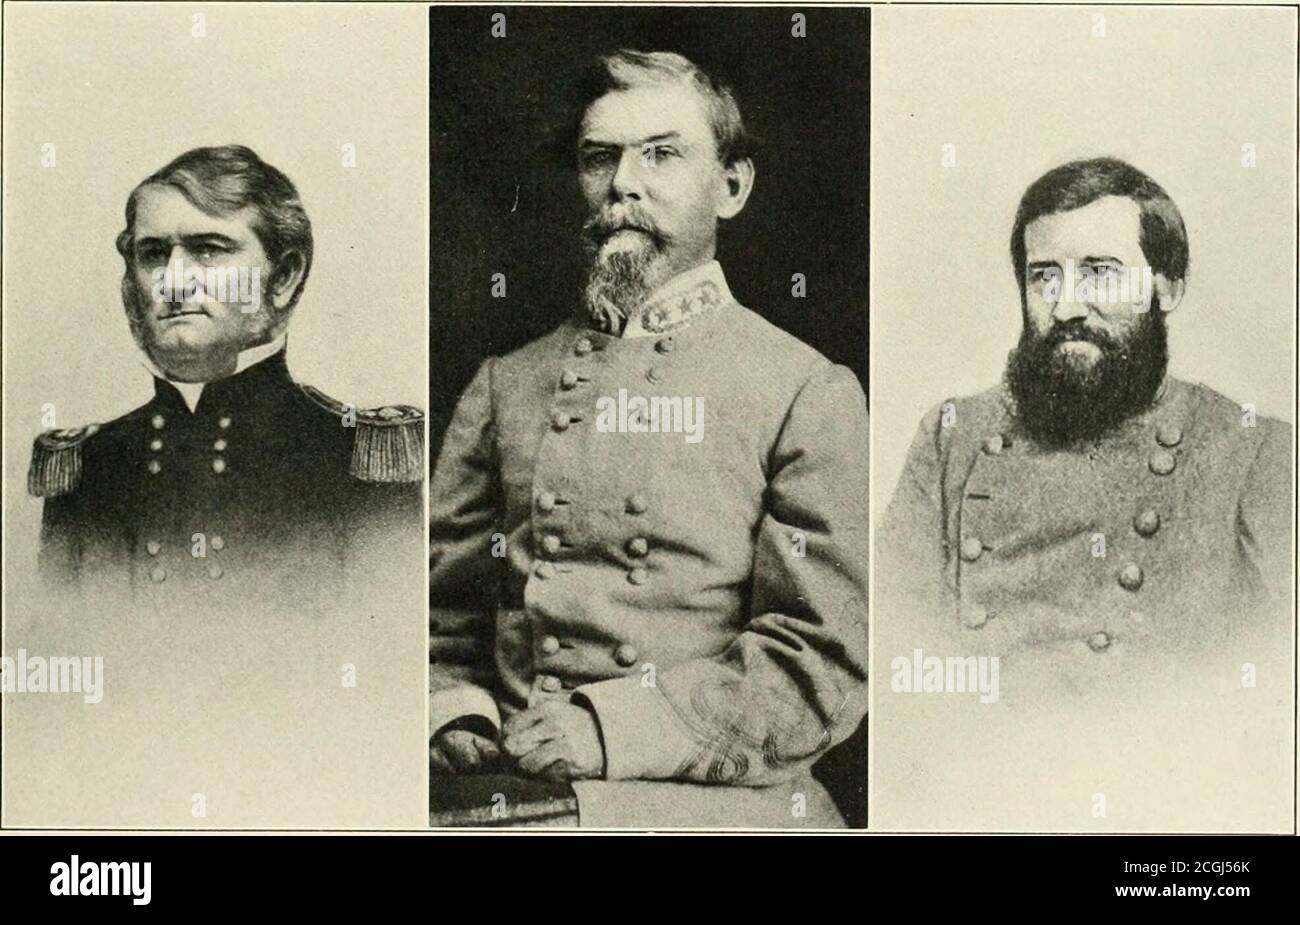 . The photographic history of the civil war.. . Wade Hampton Fought from BullRun to Bentonville. With J. E. B. Stuarts Cavalry he Stood in the Way of Sheridan at Trevilian Station in 18(H. Richard Henry Anderson Com-manded a Brigade on the Pen-insula; Later He Commanded aDivision and, after the Wilder-ness, Longstreets Corps. John Brown Gordon. This In-trepid Leader of Forlorn HopeAssaults Rose from a CivilianCaptain to the Second HighestRank in the Army.. Leonidas Polk, Bishop and Soldier Both, to the End; He Fell on the Battlefield of Pine Mountain in the Defense of Atlanta. William Joseph H Stock Photo